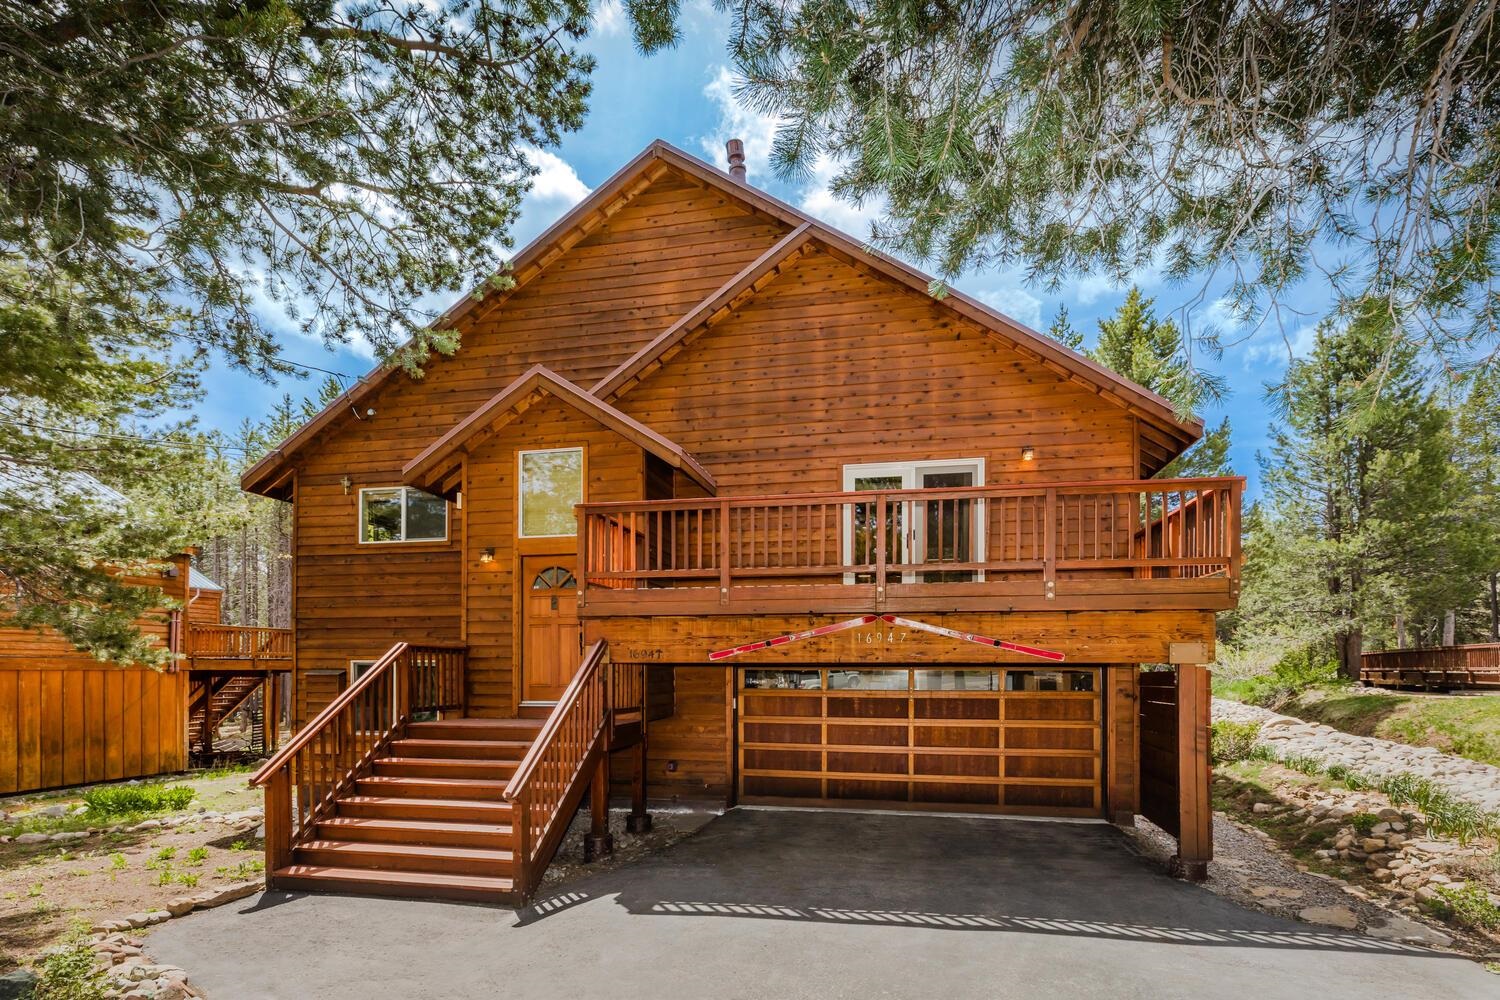 Image for 16947 Skislope Way, Truckee, CA 96161-0000